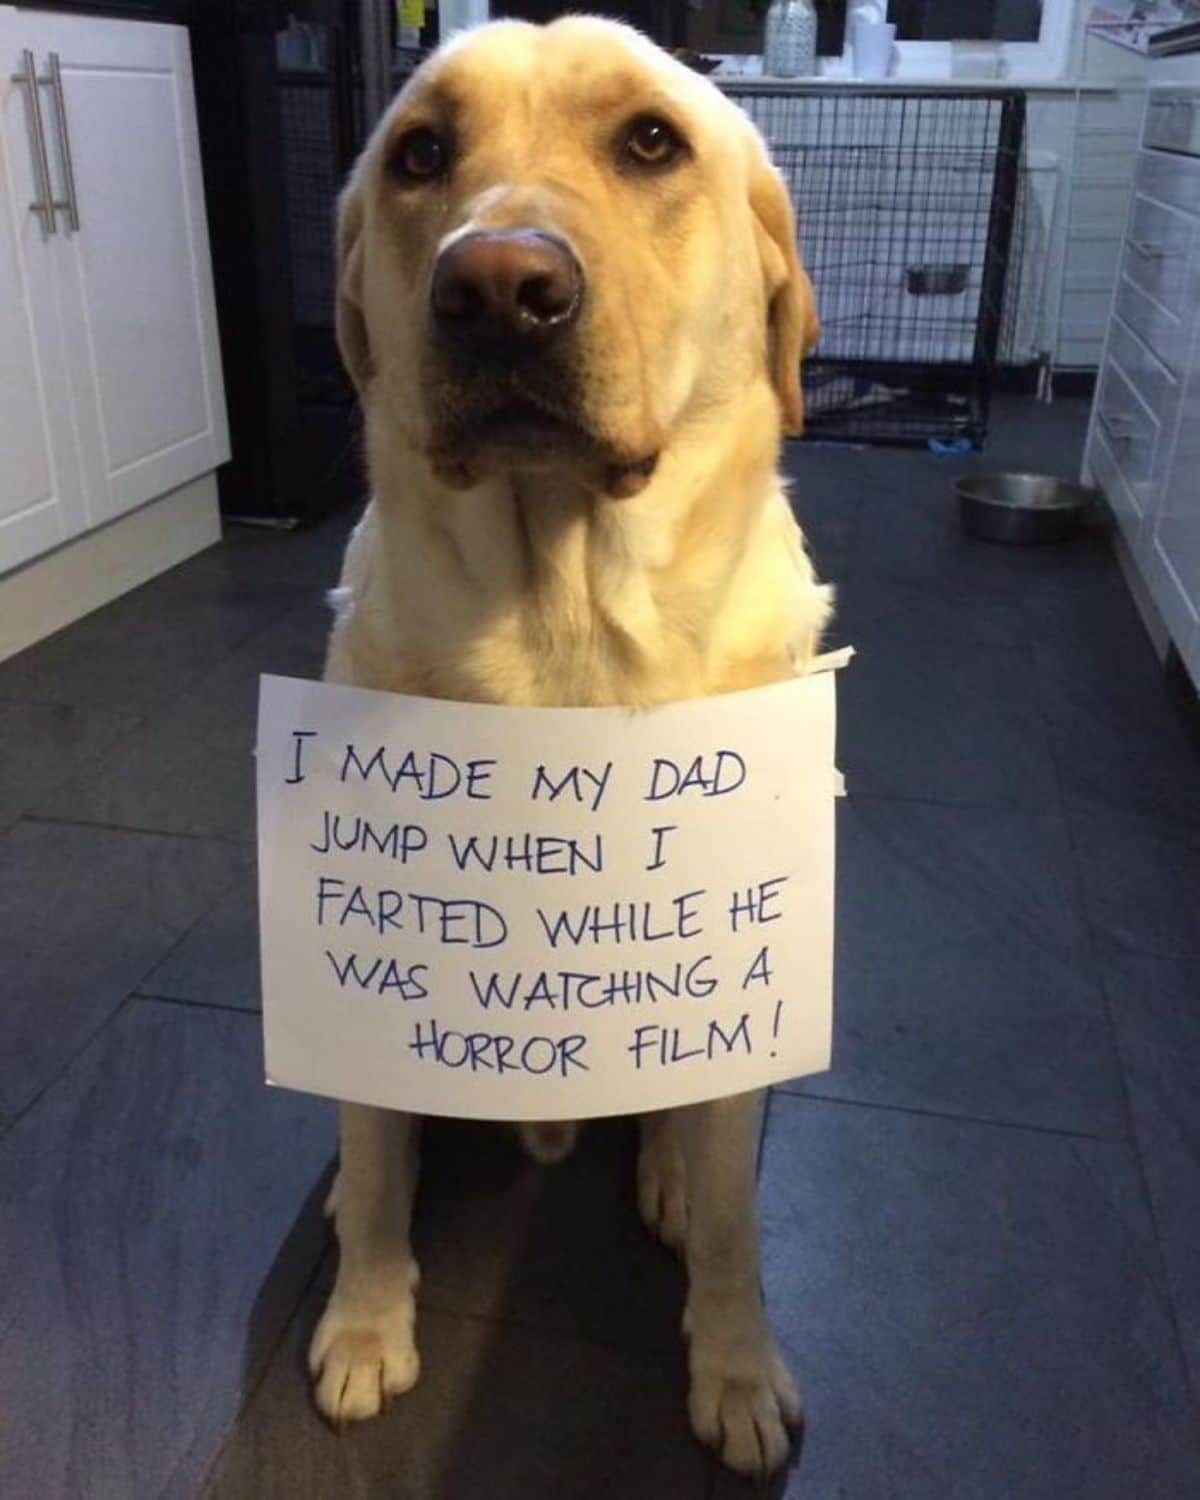 yellow labrador sitting on the floor with a note saying he farted and scared the dad when he was watching a horror movie